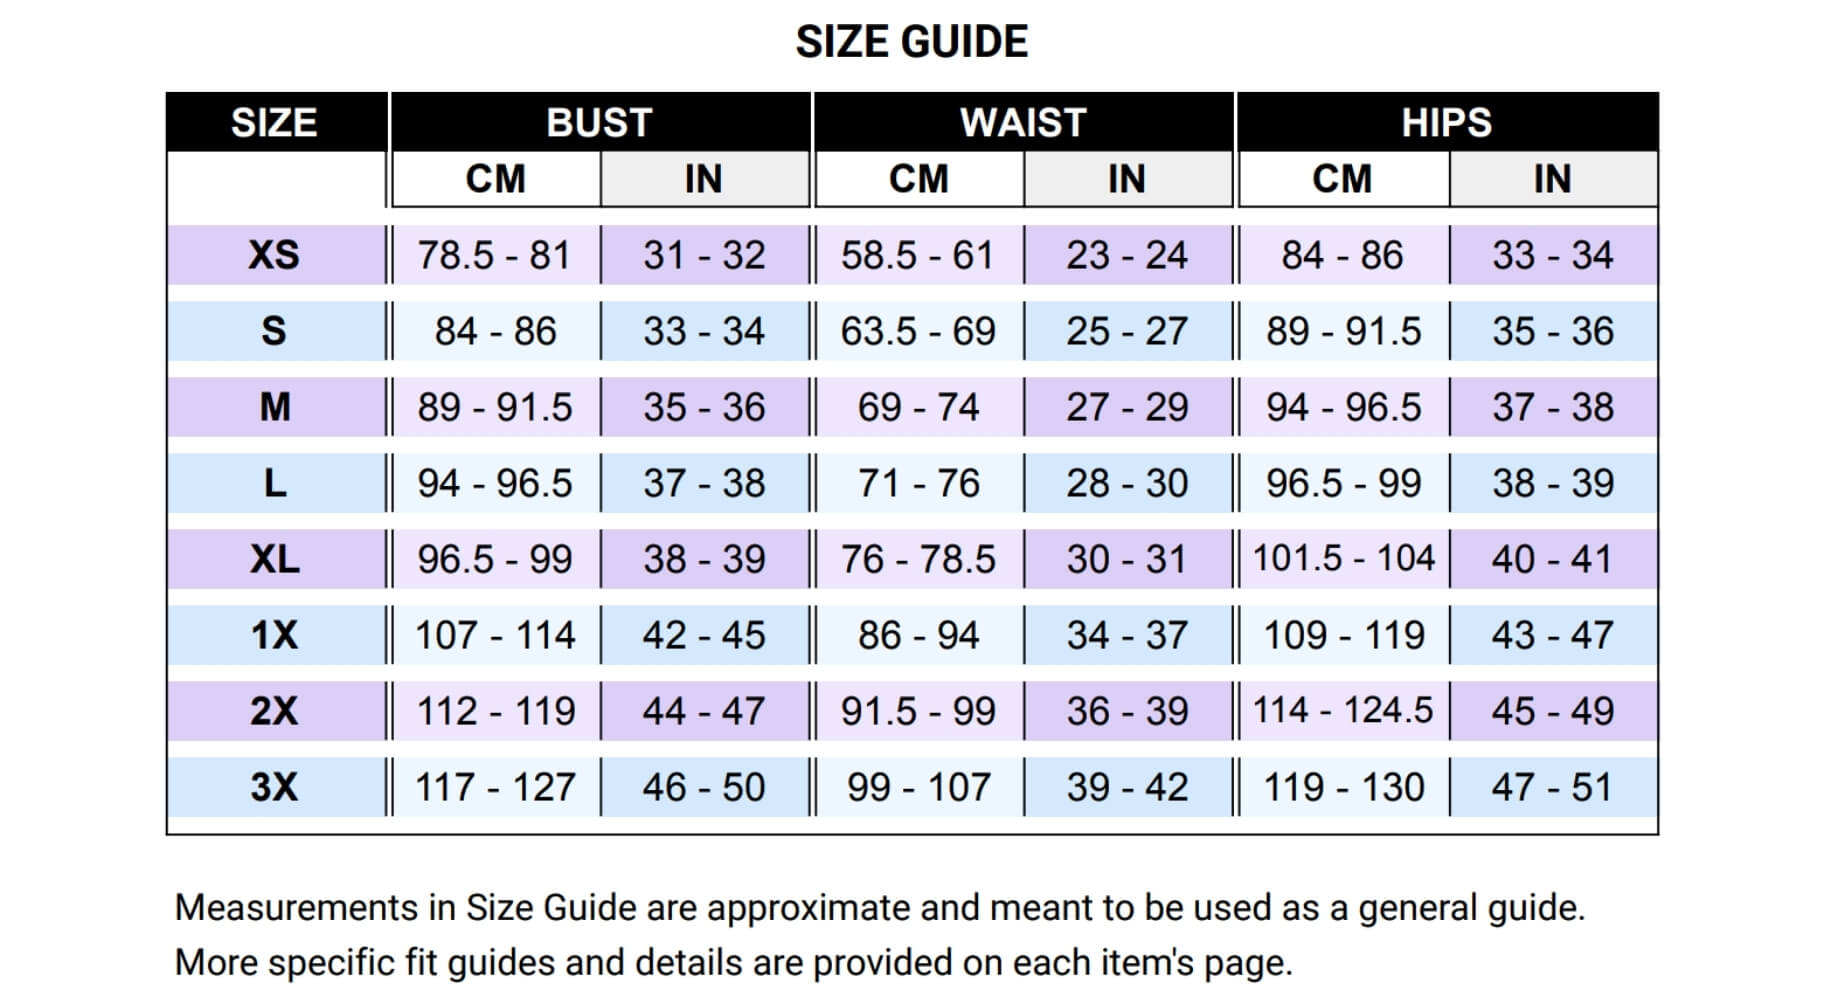 Rebella Size Guide in centimeters and inches, sizes XS through 3X